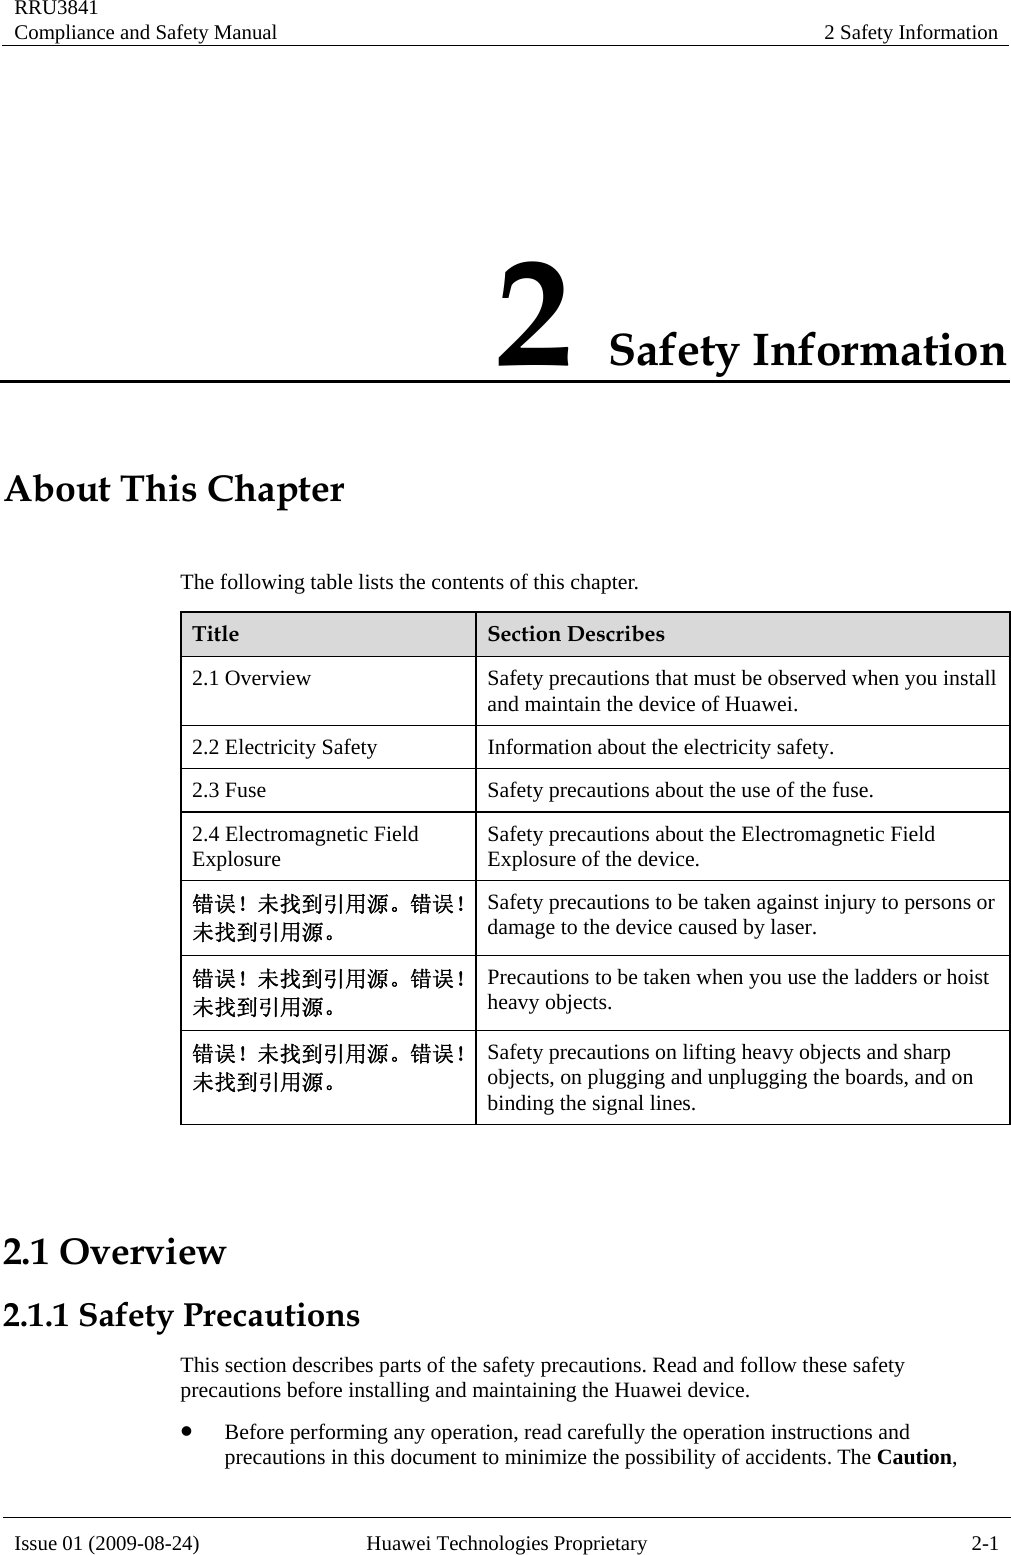 RRU3841 Compliance and Safety Manual  2 Safety Information  Issue 01 (2009-08-24)  Huawei Technologies Proprietary  2-1 2 Safety Information About This Chapter The following table lists the contents of this chapter.   Title  Section Describes 2.1 Overview  Safety precautions that must be observed when you install and maintain the device of Huawei. 2.2 Electricity Safety  Information about the electricity safety. 2.3 Fuse  Safety precautions about the use of the fuse. 2.4 Electromagnetic Field Explosure  Safety precautions about the Electromagnetic Field Explosure of the device. 错误！未找到引用源。错误！未找到引用源。  Safety precautions to be taken against injury to persons or damage to the device caused by laser. 错误！未找到引用源。错误！未找到引用源。  Precautions to be taken when you use the ladders or hoist heavy objects. 错误！未找到引用源。错误！未找到引用源。 Safety precautions on lifting heavy objects and sharp objects, on plugging and unplugging the boards, and on binding the signal lines.  2.1 Overview 2.1.1 Safety Precautions This section describes parts of the safety precautions. Read and follow these safety precautions before installing and maintaining the Huawei device.   z Before performing any operation, read carefully the operation instructions and precautions in this document to minimize the possibility of accidents. The Caution, 